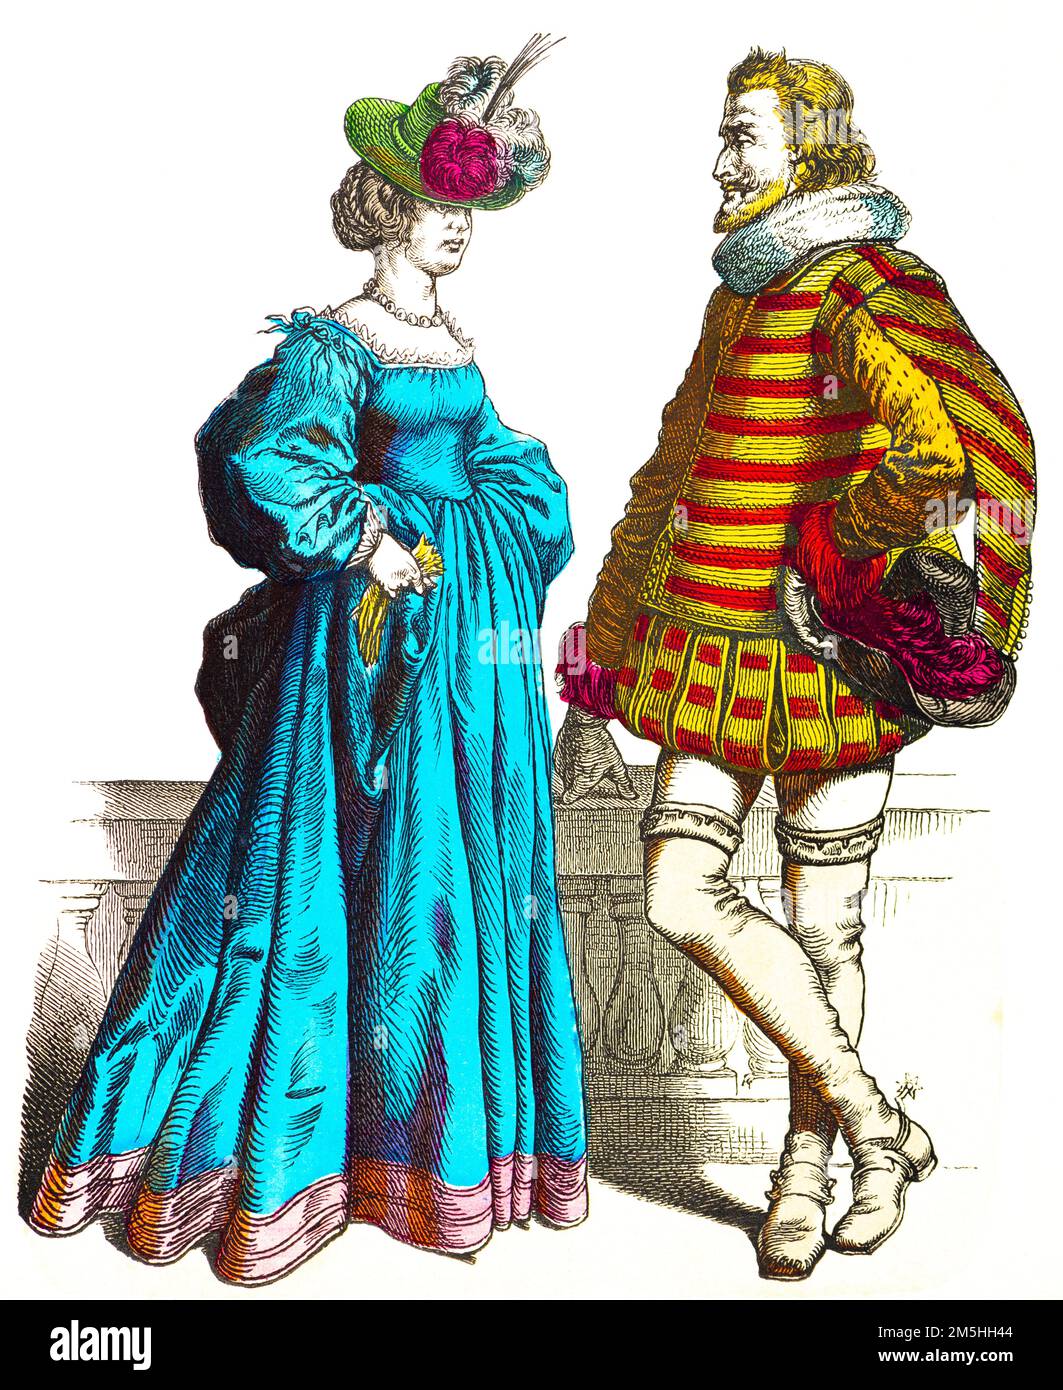 Historical costumes in the middle of 17th century,  historical illustration, Münchener Bilderbogen, München 1890 Stock Photo